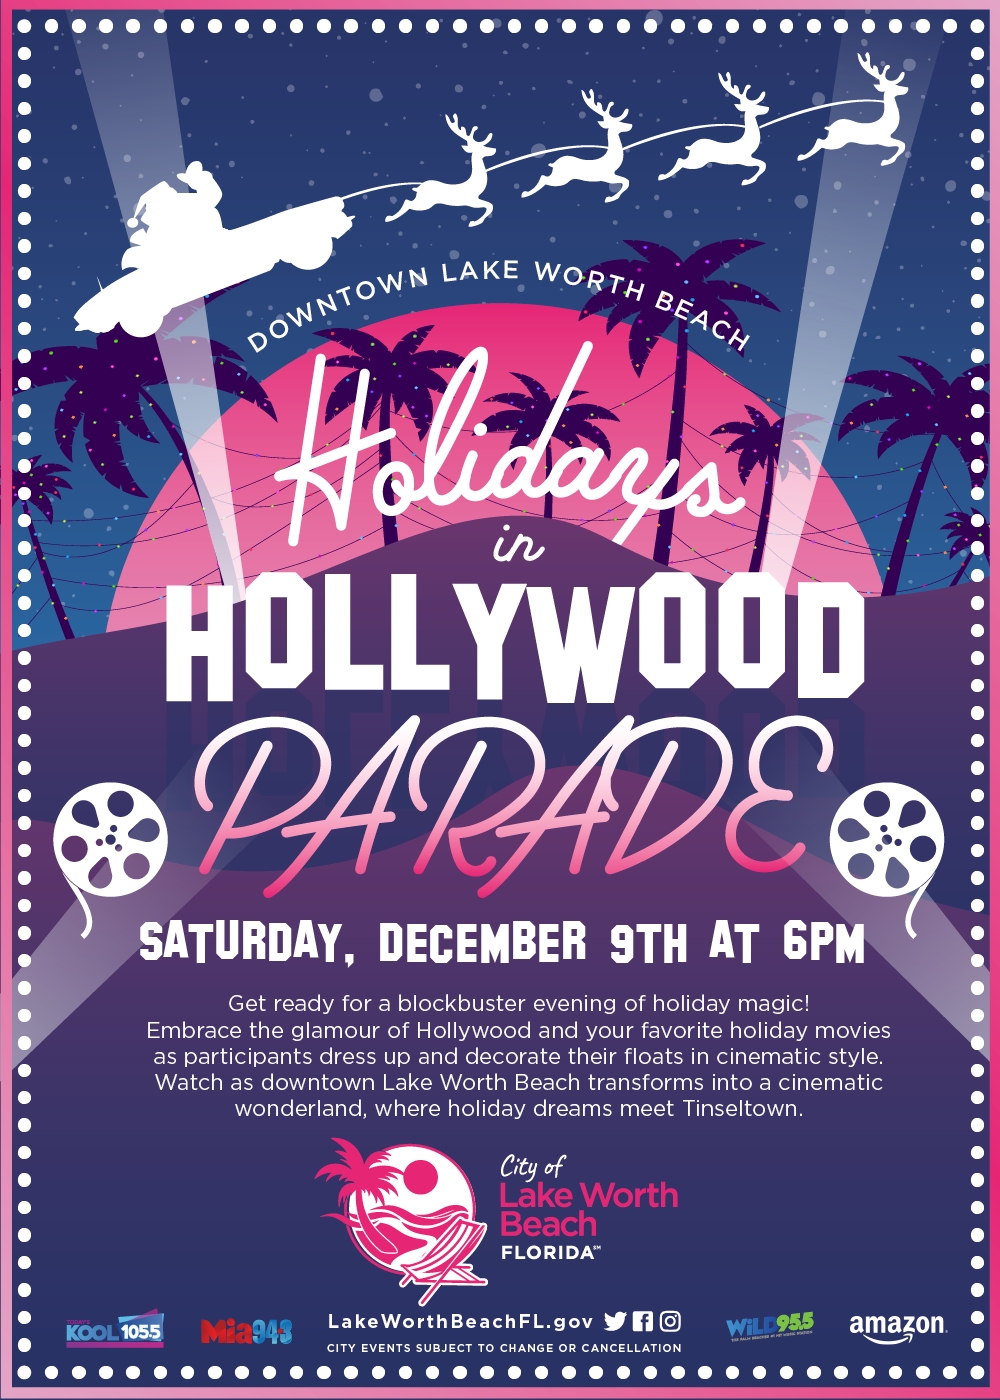 Lake Worth Beach Holidays in Hollywood Parade cover image